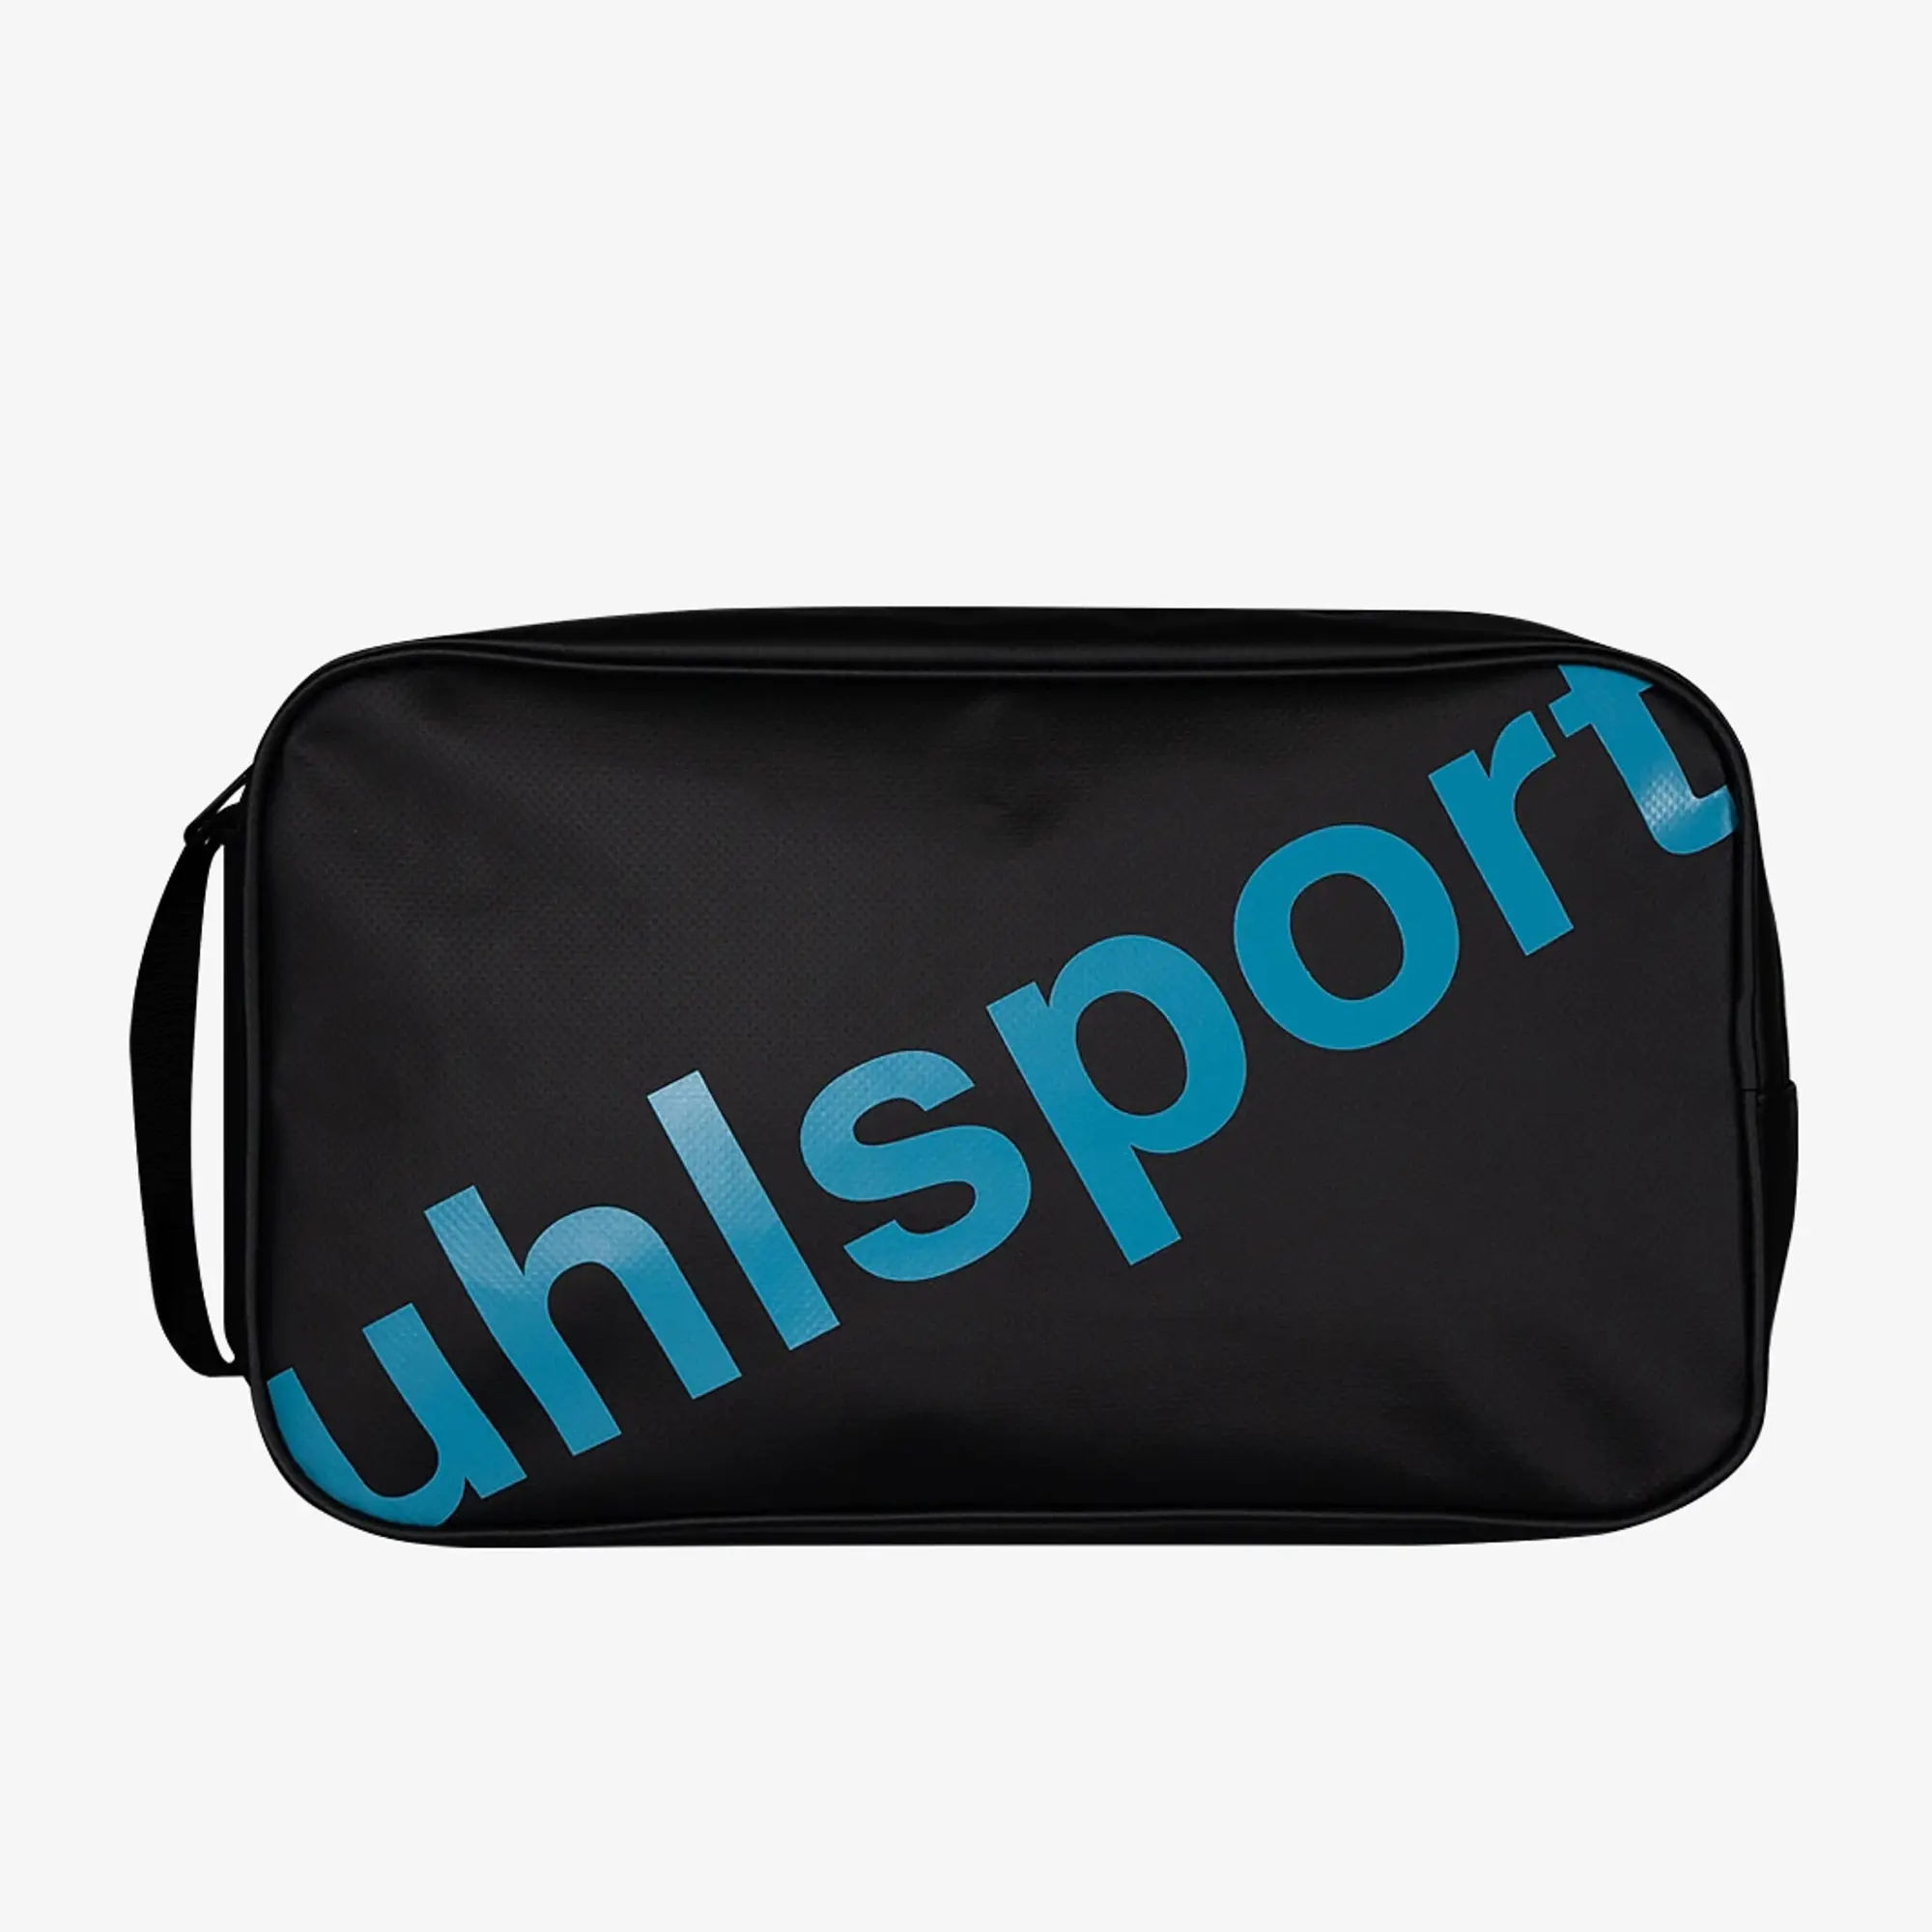 Uhlsport Speed Contact Glove Bag